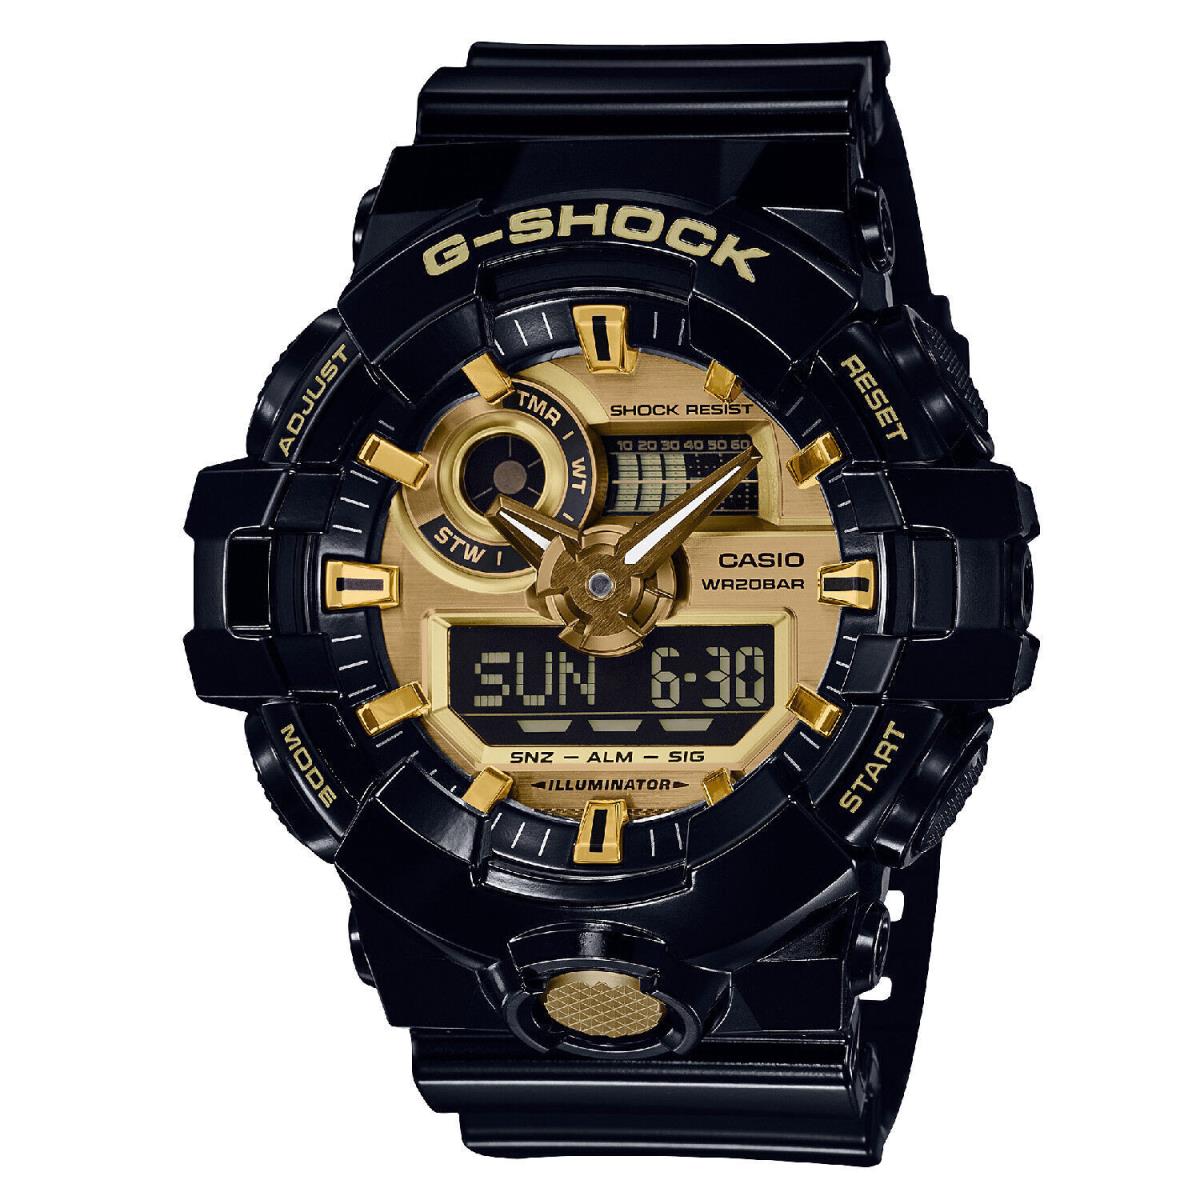 New- Casio G-shock Black Watch with Gold Tone Accents GA710GB-1A